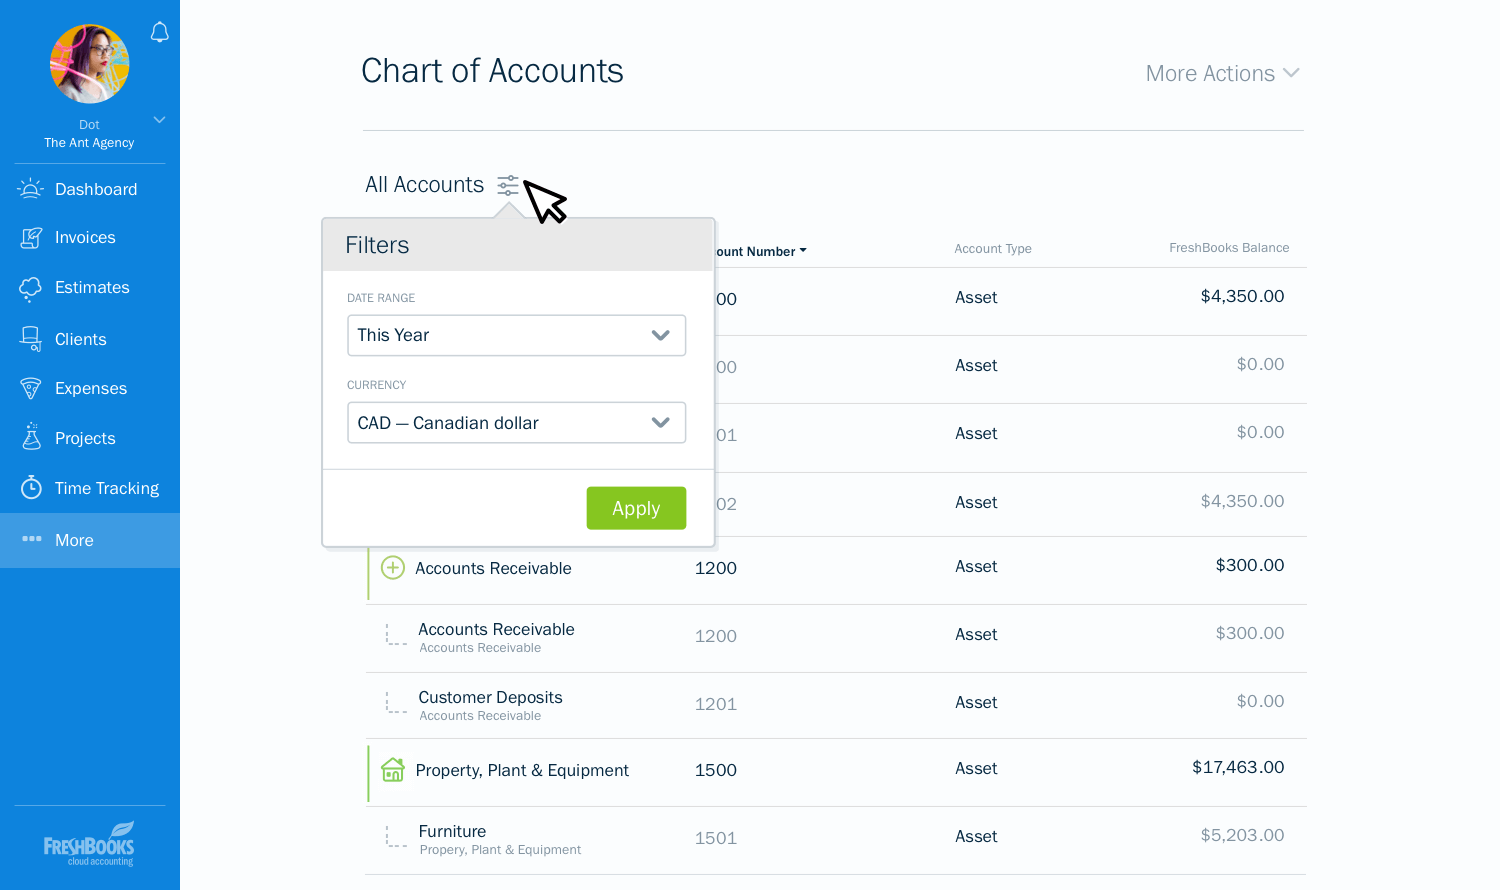 What Does The Chart Of Accounts List